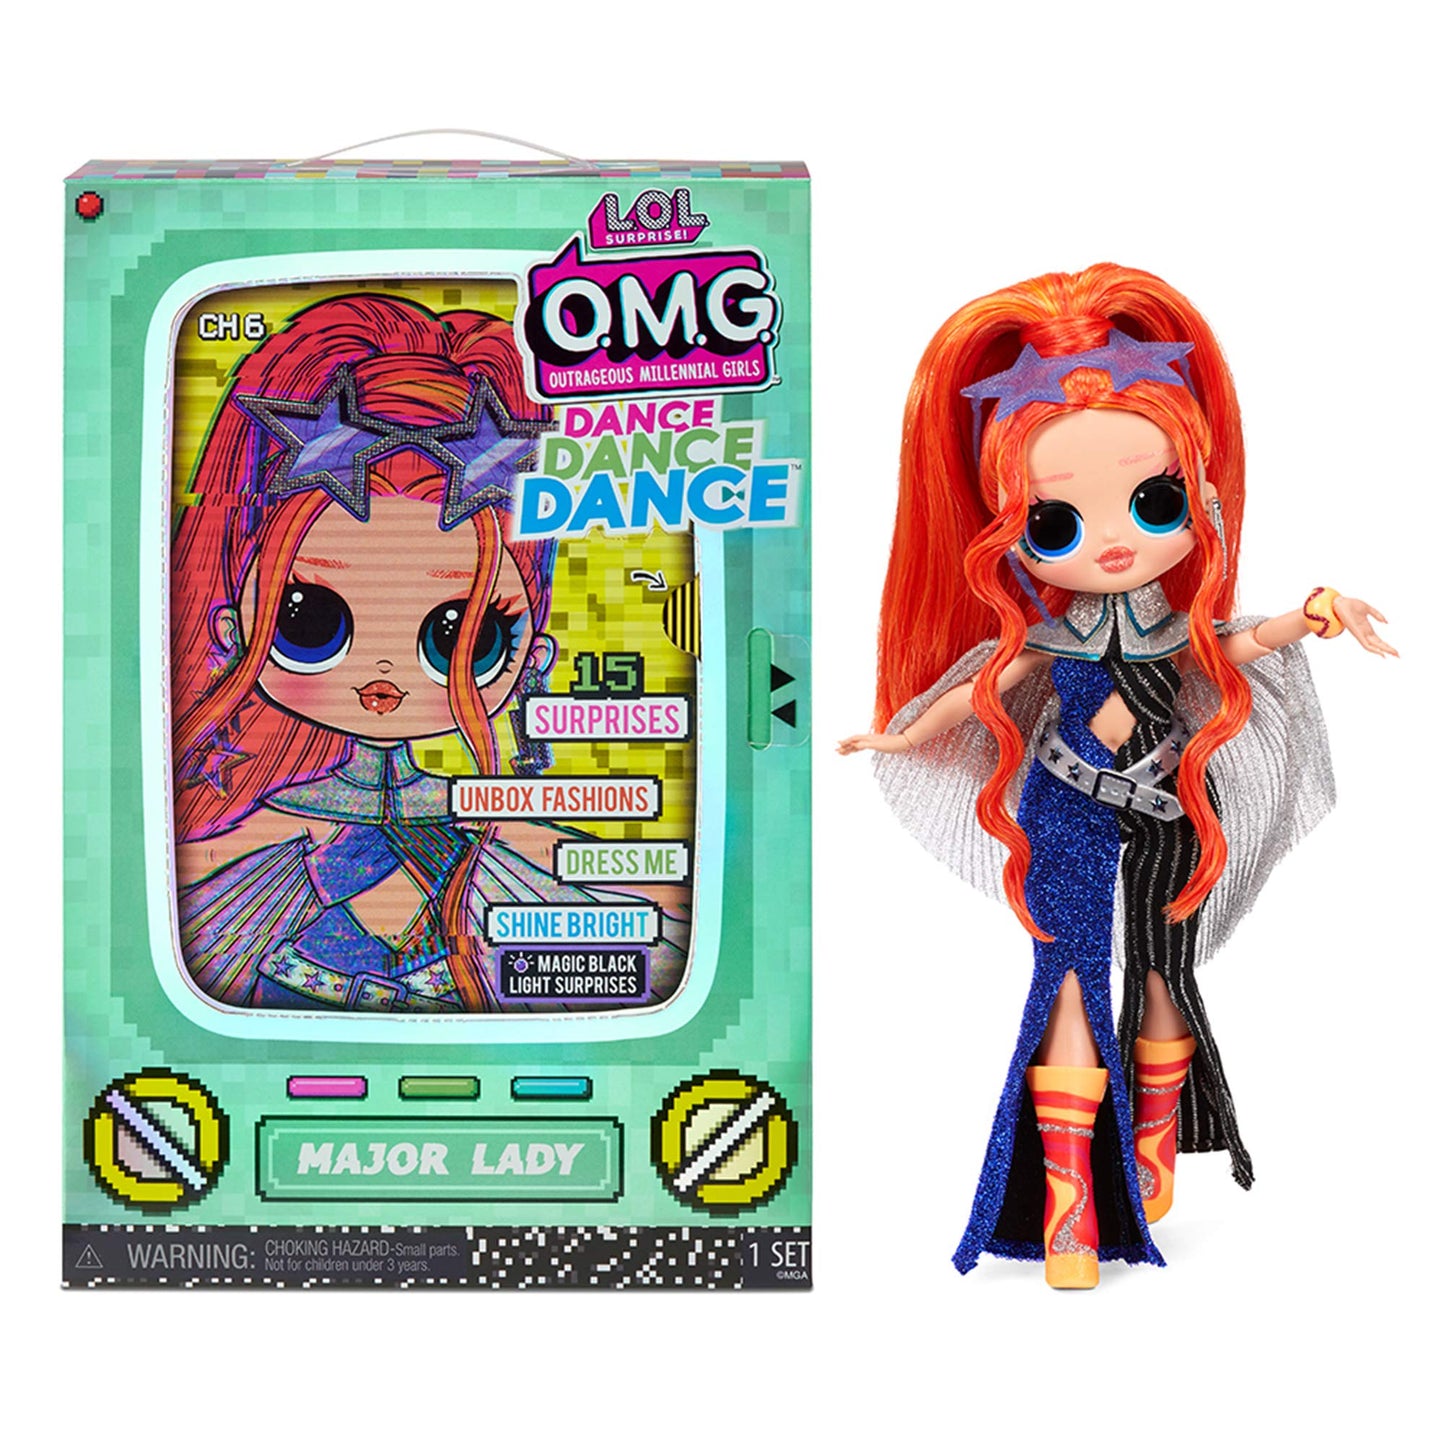 LOL Surprise OMG Dance Dance Dance Major Lady Fashion Doll with 15 Surprises Including Magic Black Light, Shoes, Hair Brush, Doll Stand and Television Package - A Great Gift for Girls Ages 4+